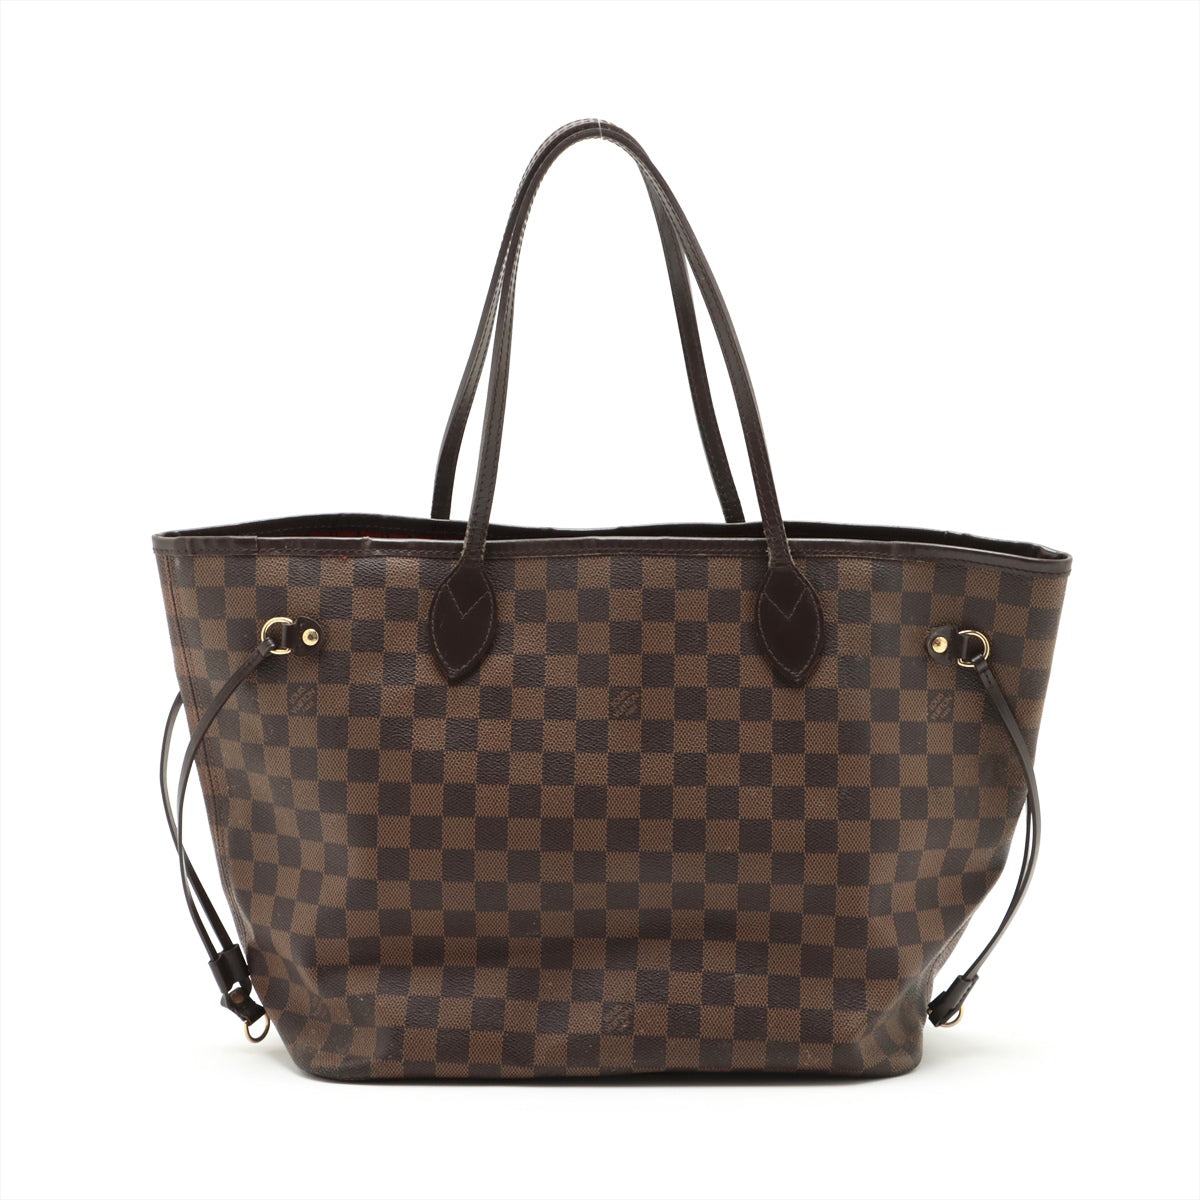 LOUIS VUITTON Neverfull PM in Damier N51105 Tote